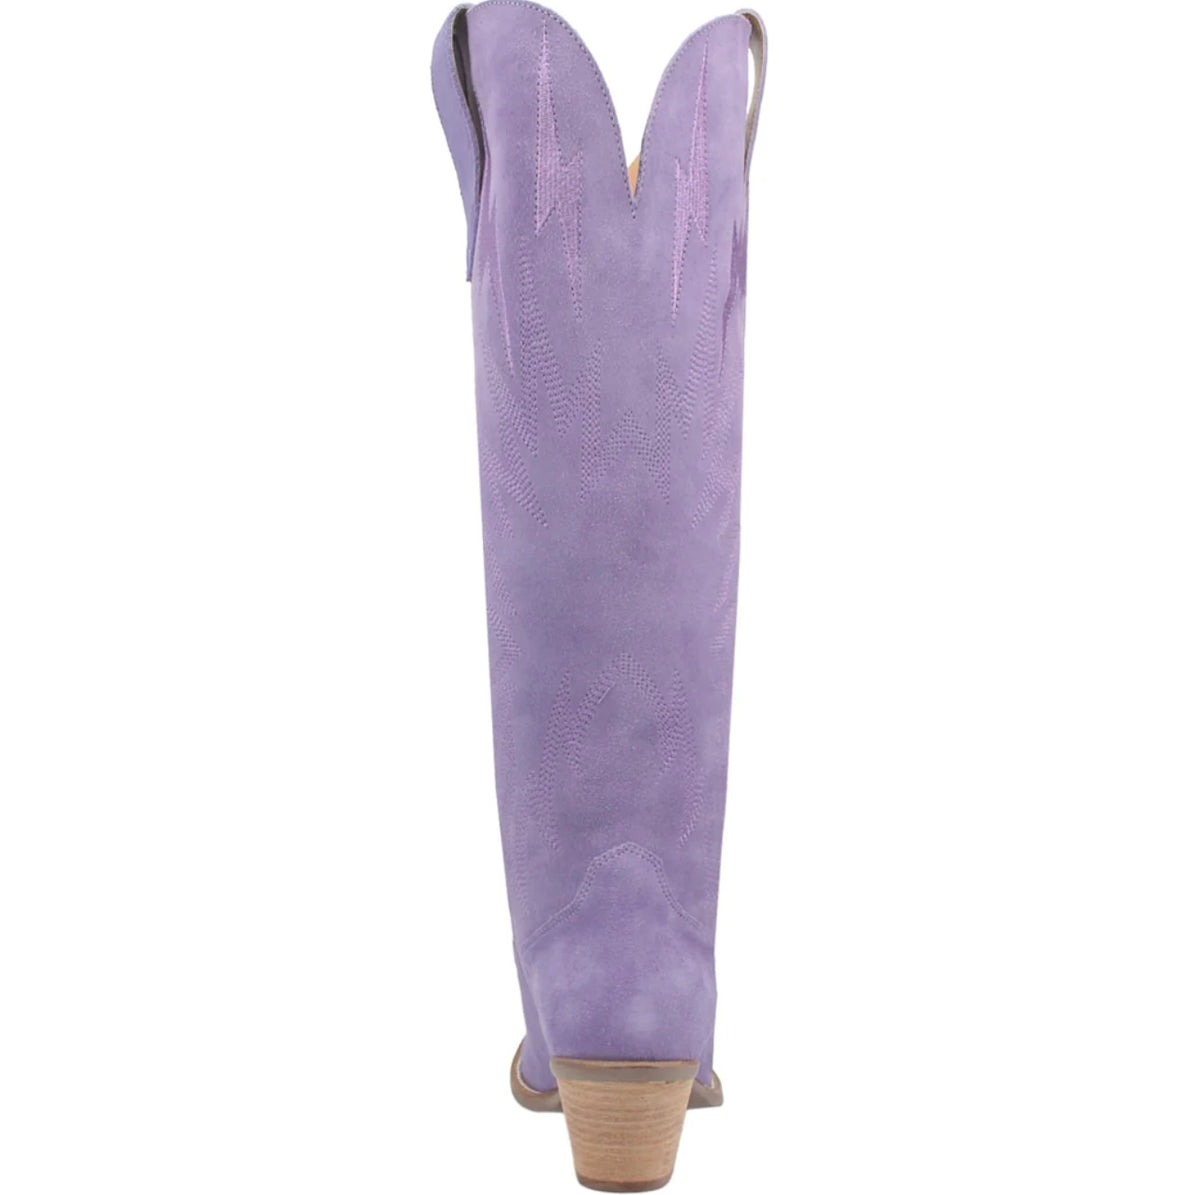 Thunder Road Leather Boot in Periwinkle